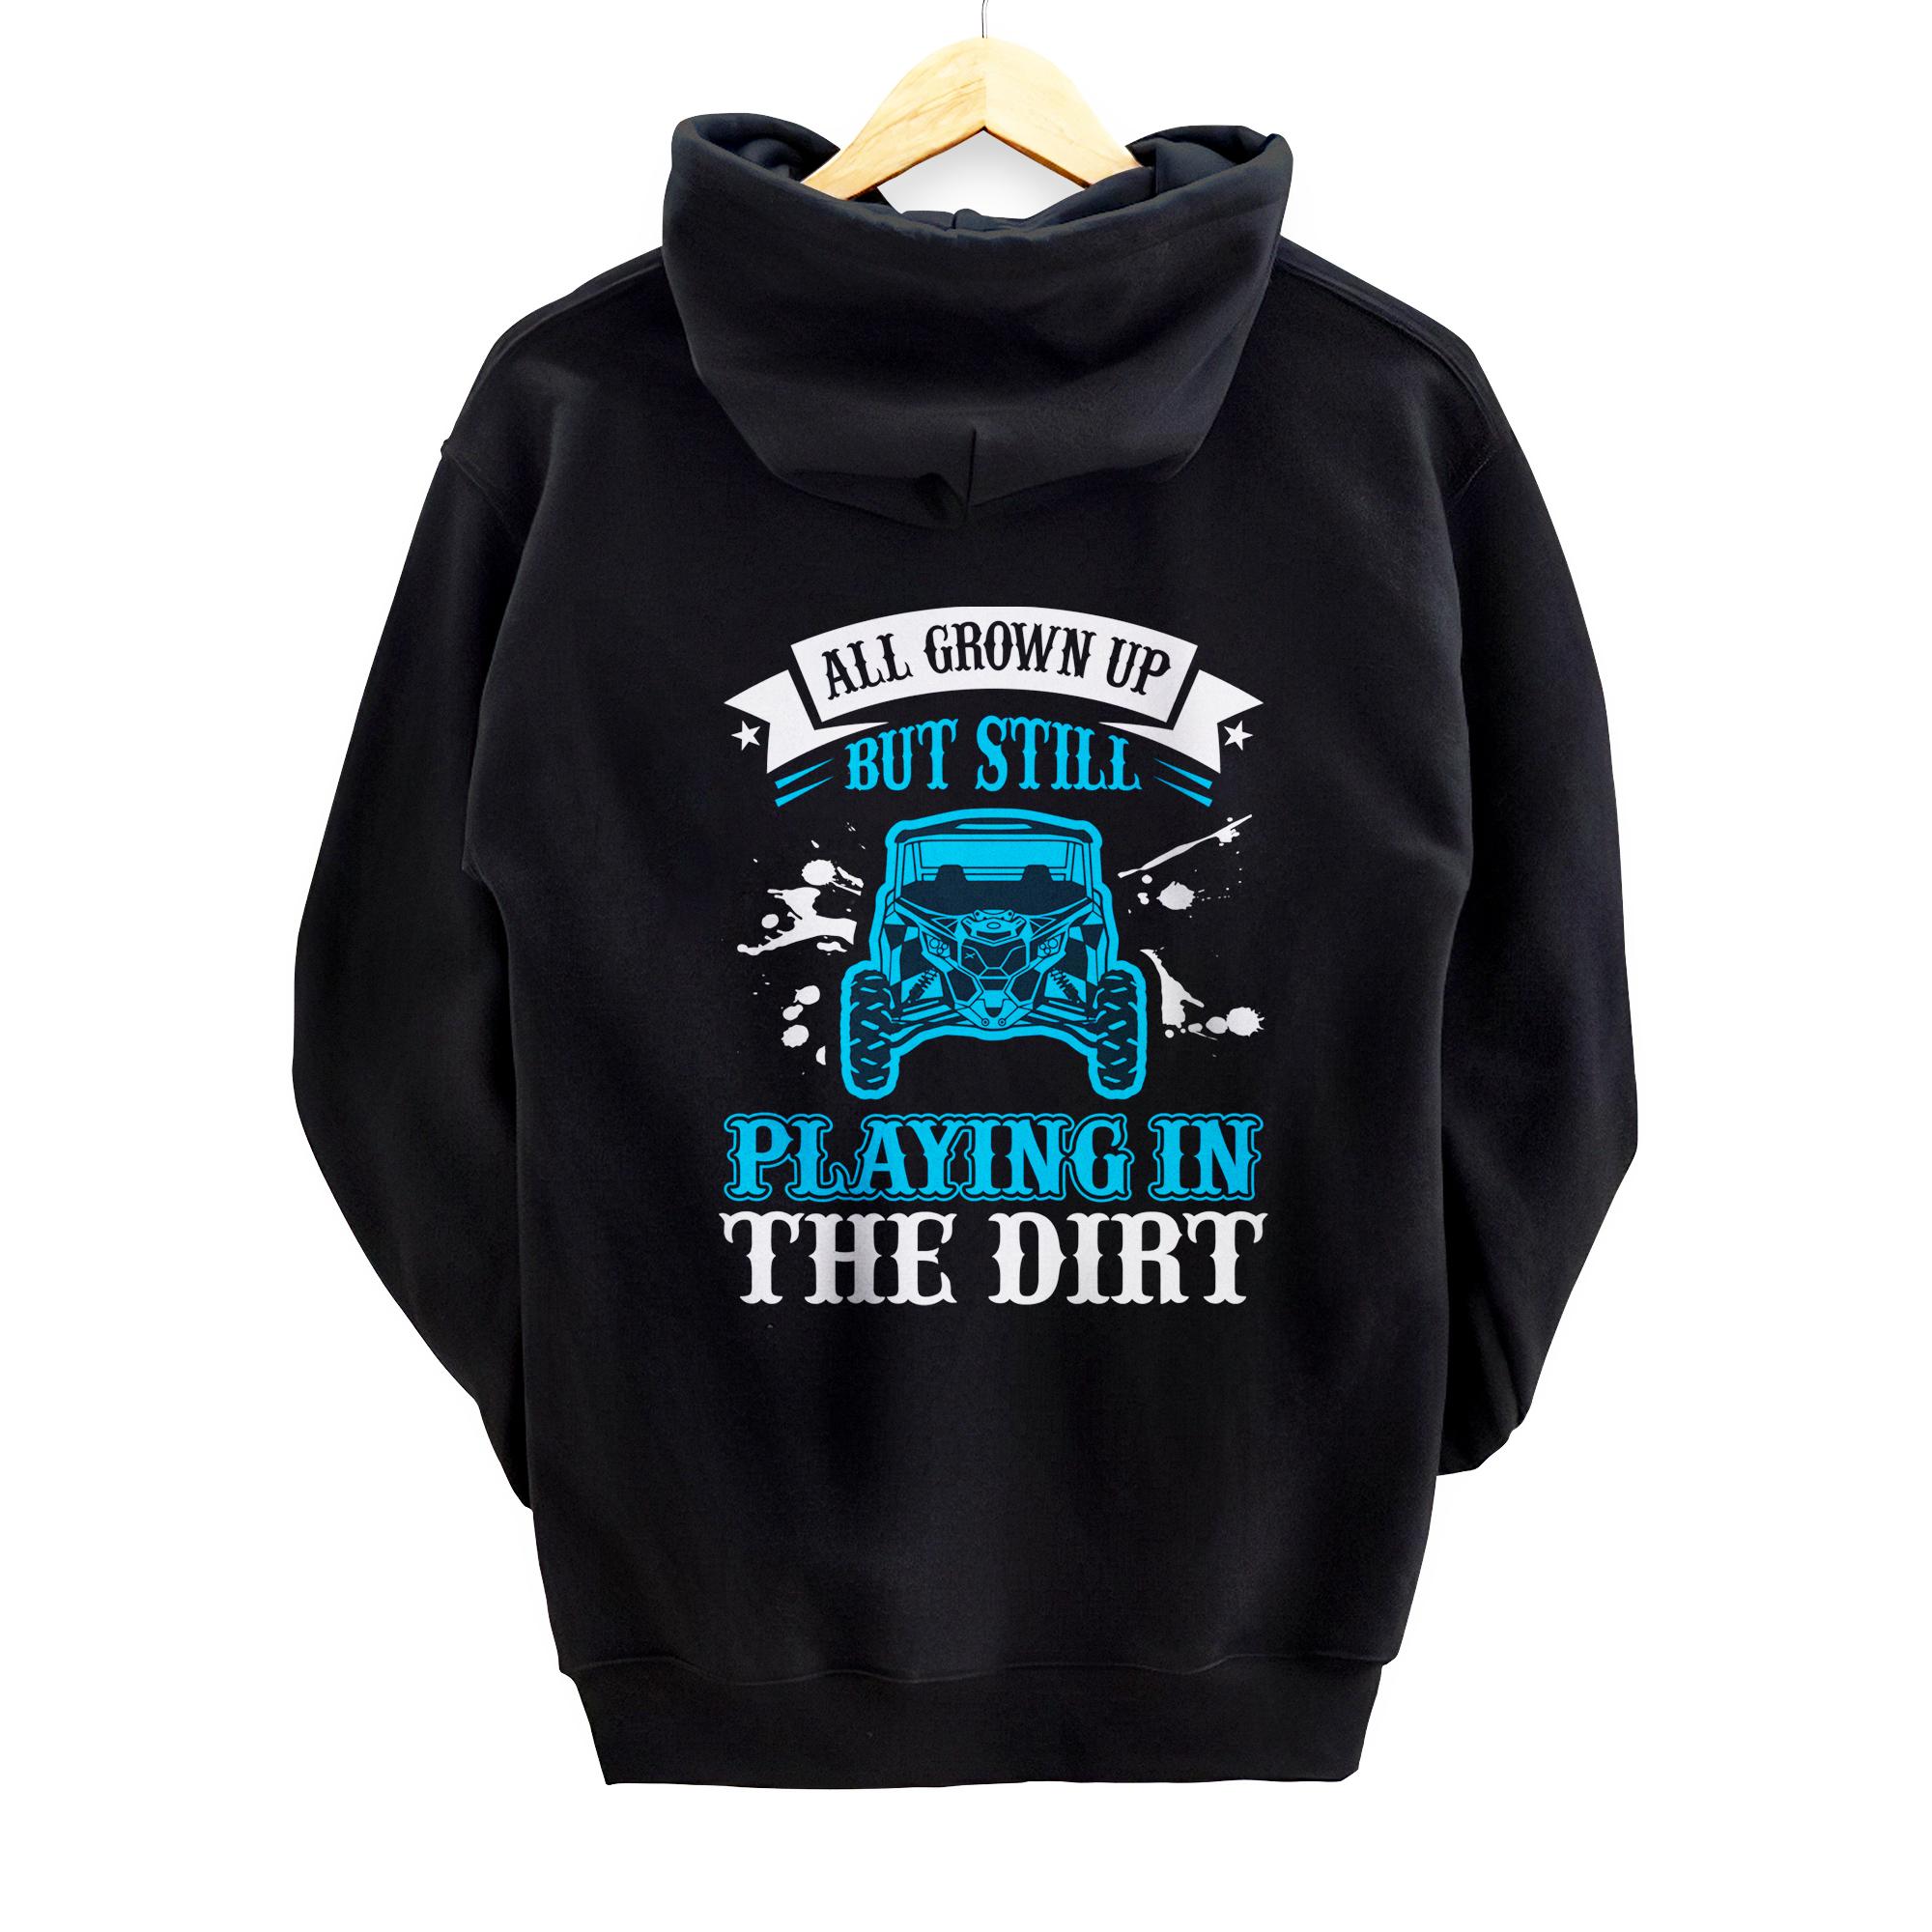 Playing in the dirt-blue sxs utv Pullover Hoodie